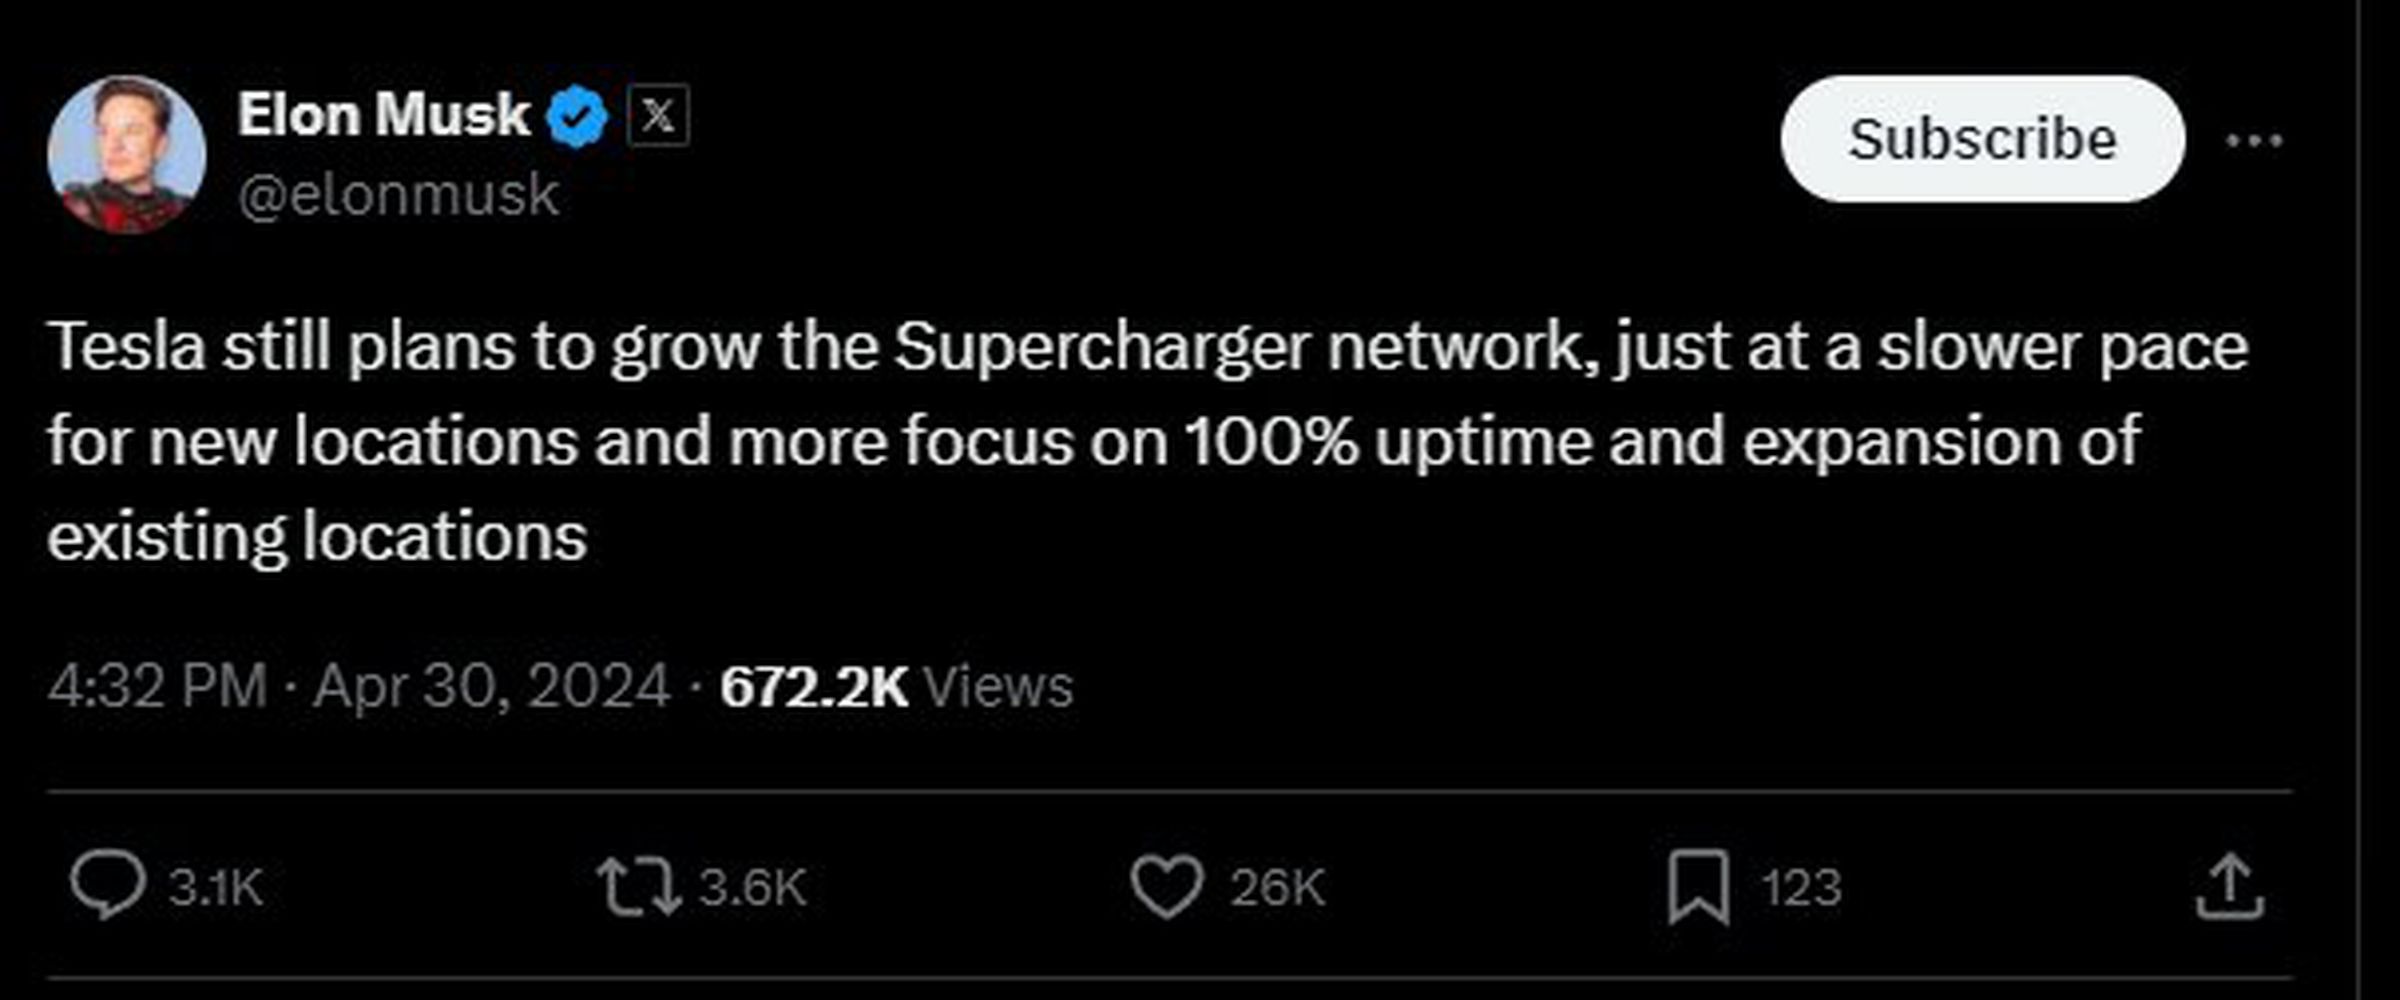 Elon Musk tweet reading “Tesla still plans to grow the Supercharger network, just at a slower pace for new locations and more focus on 100% uptime and expansion of existing locations”